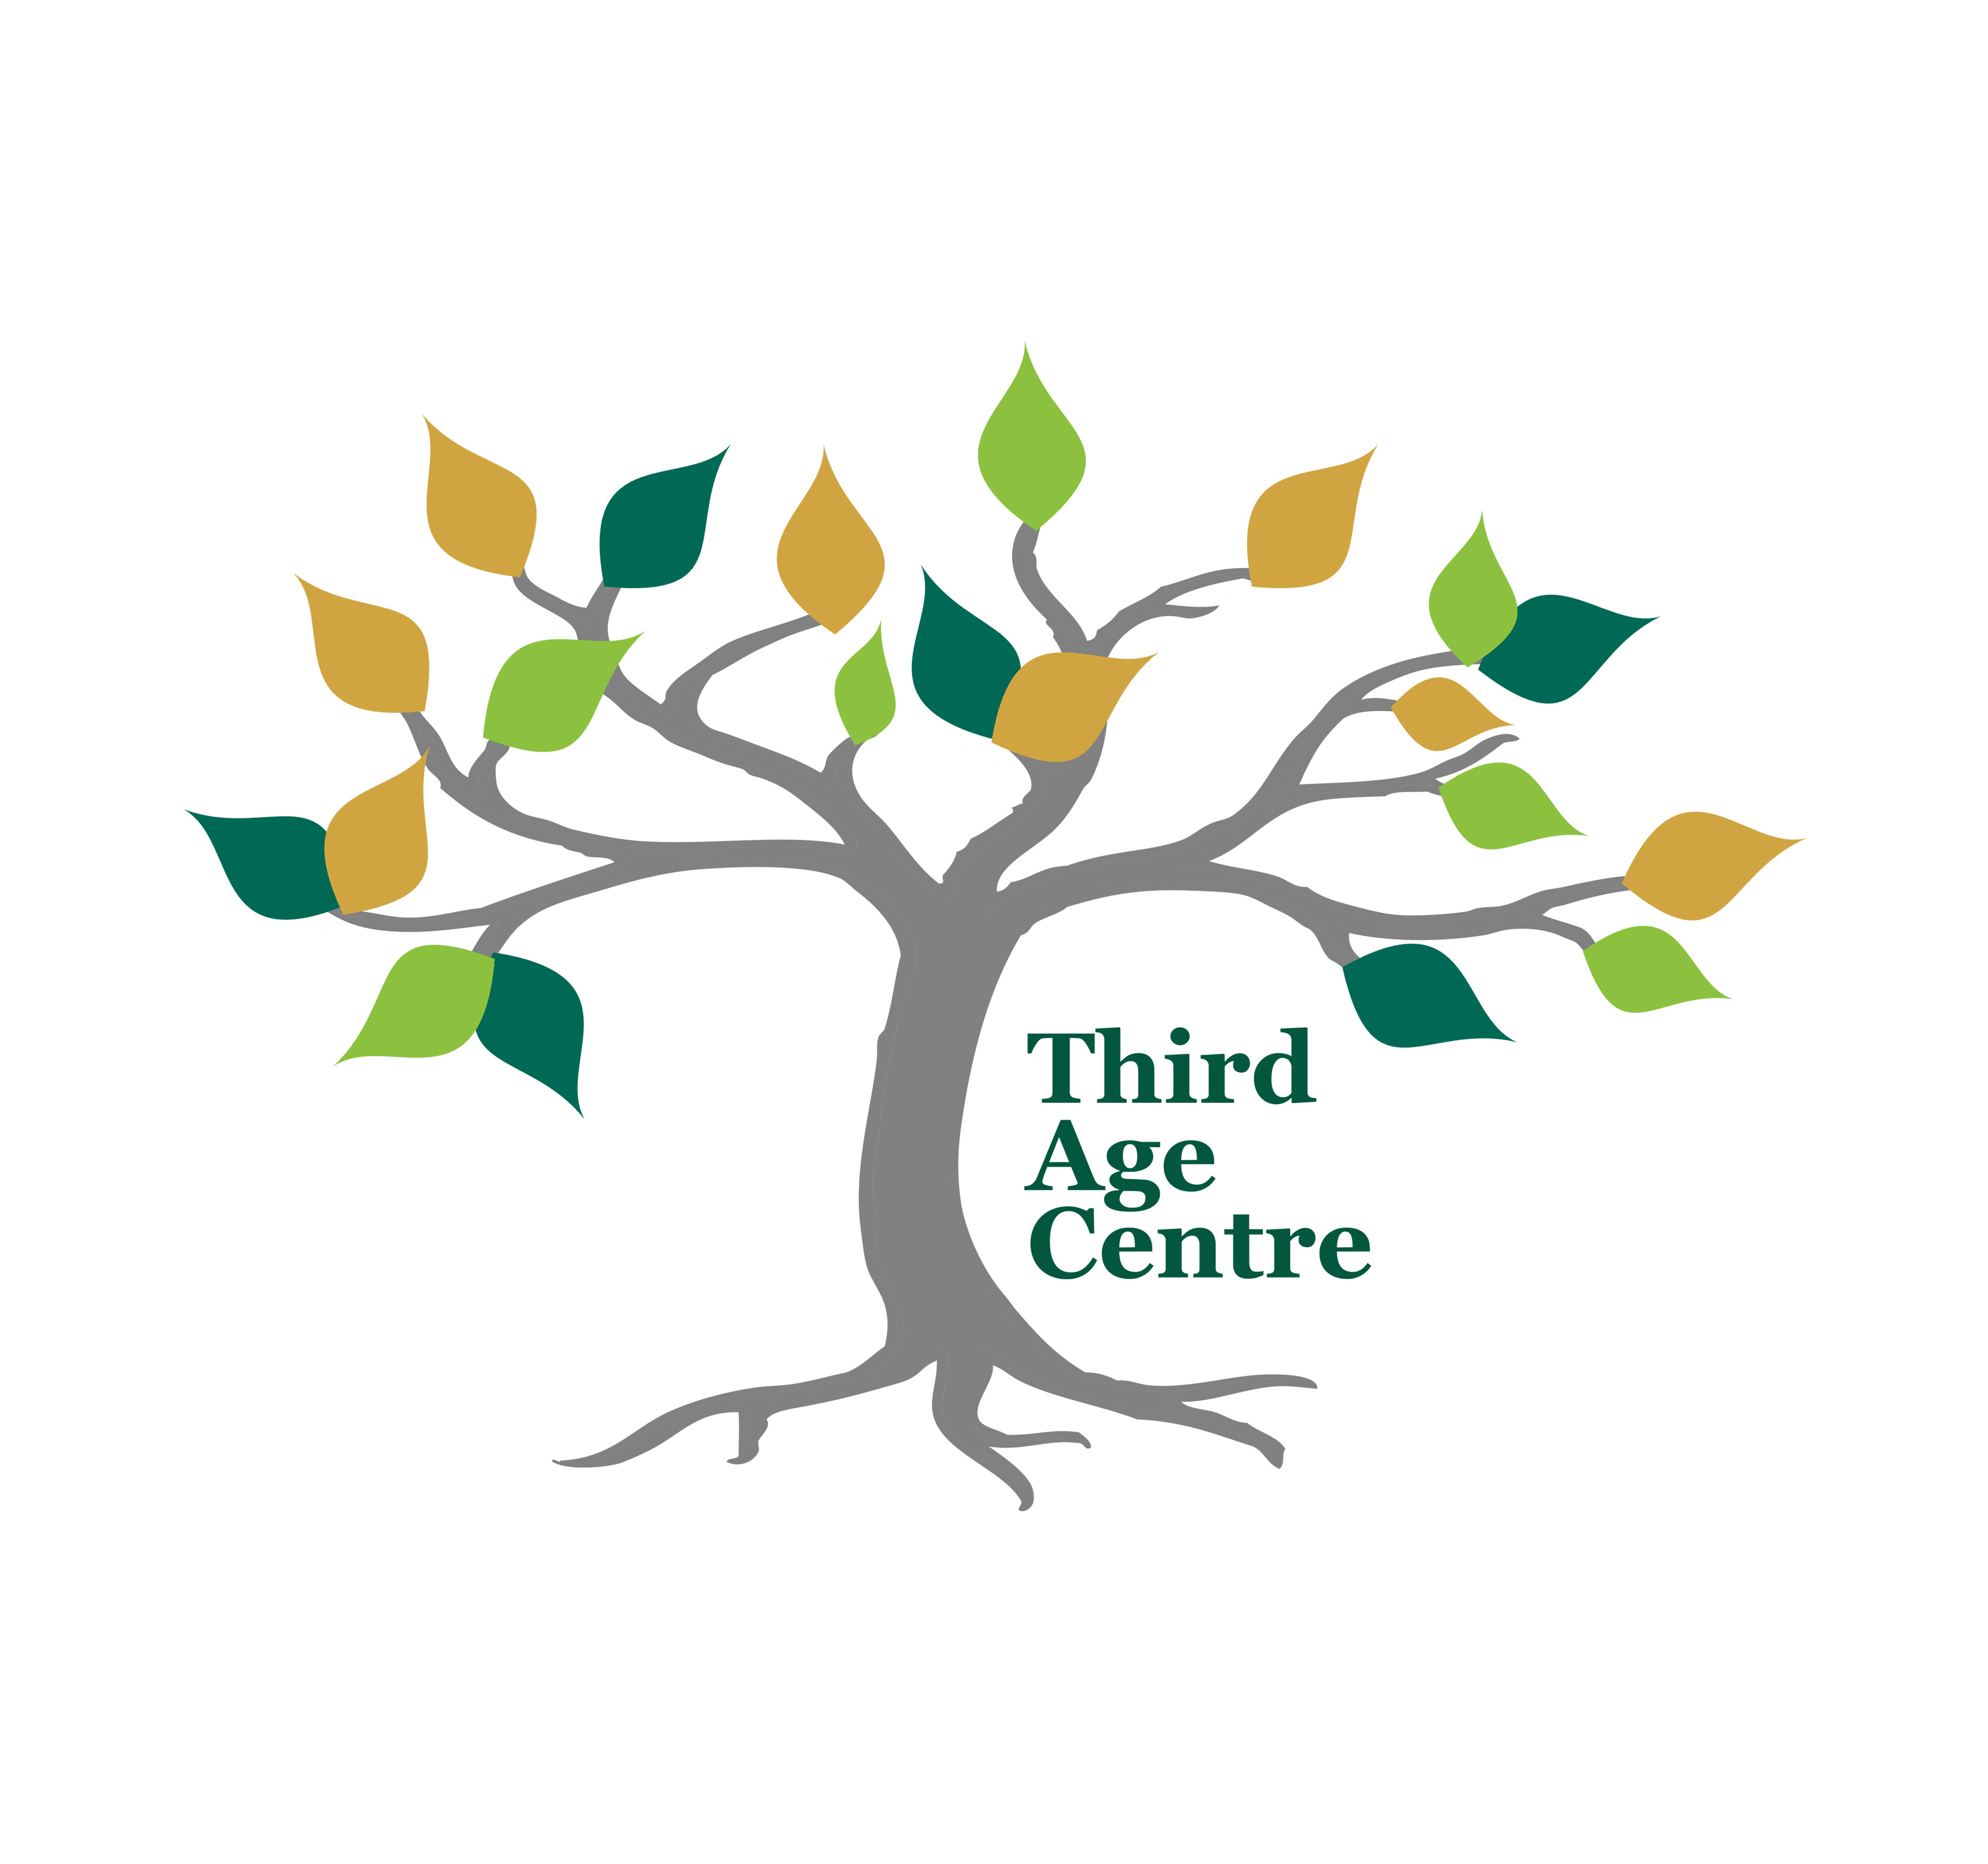 Image for Call for Interest in Serving on the Board of the Third Age Centre